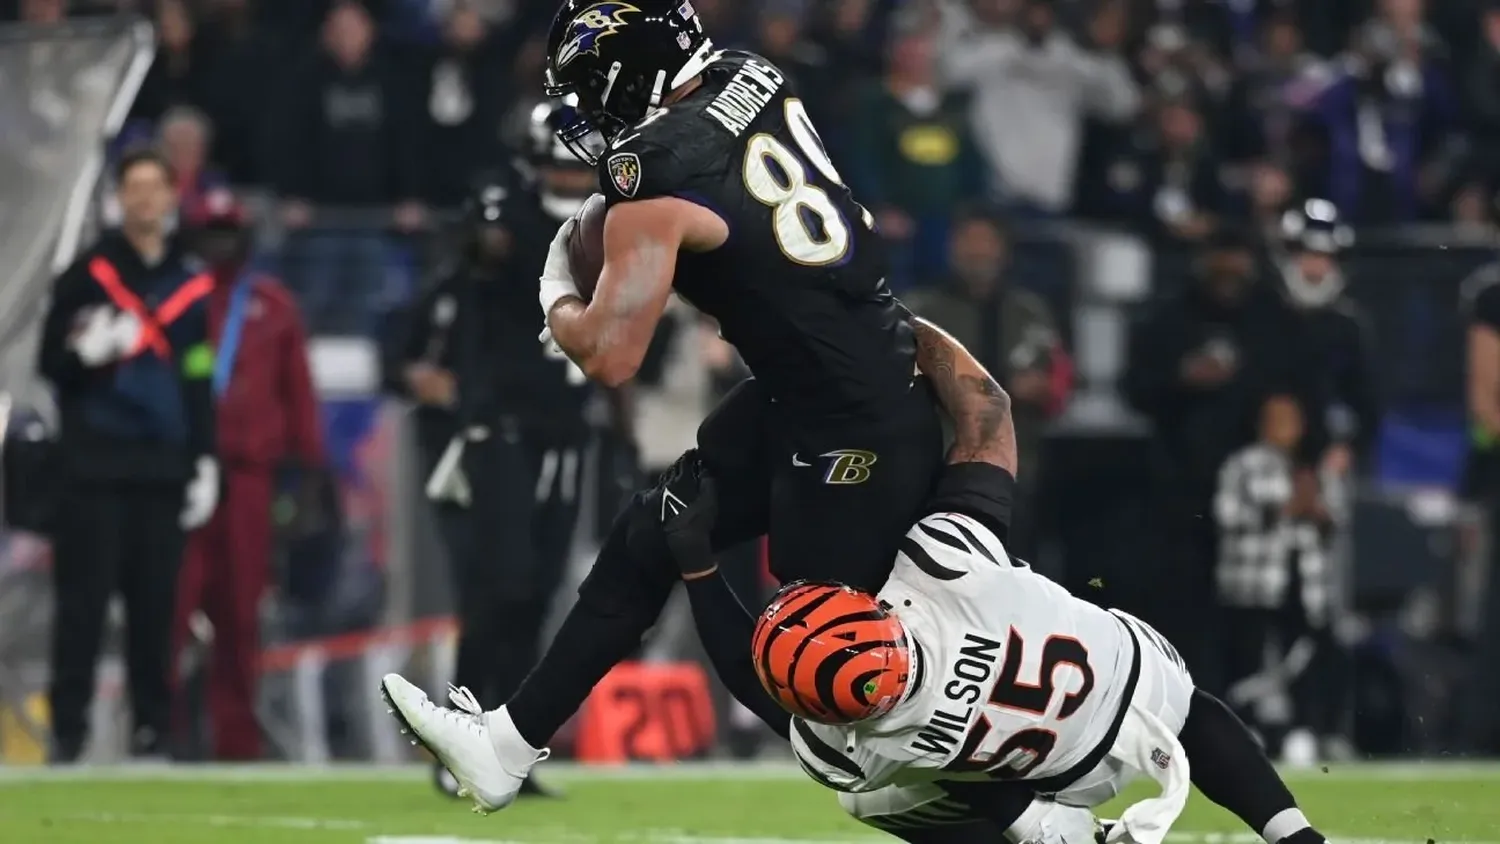 NFL's New Tackle Rule: A Step Towards Safer Football or a Step Too Far?